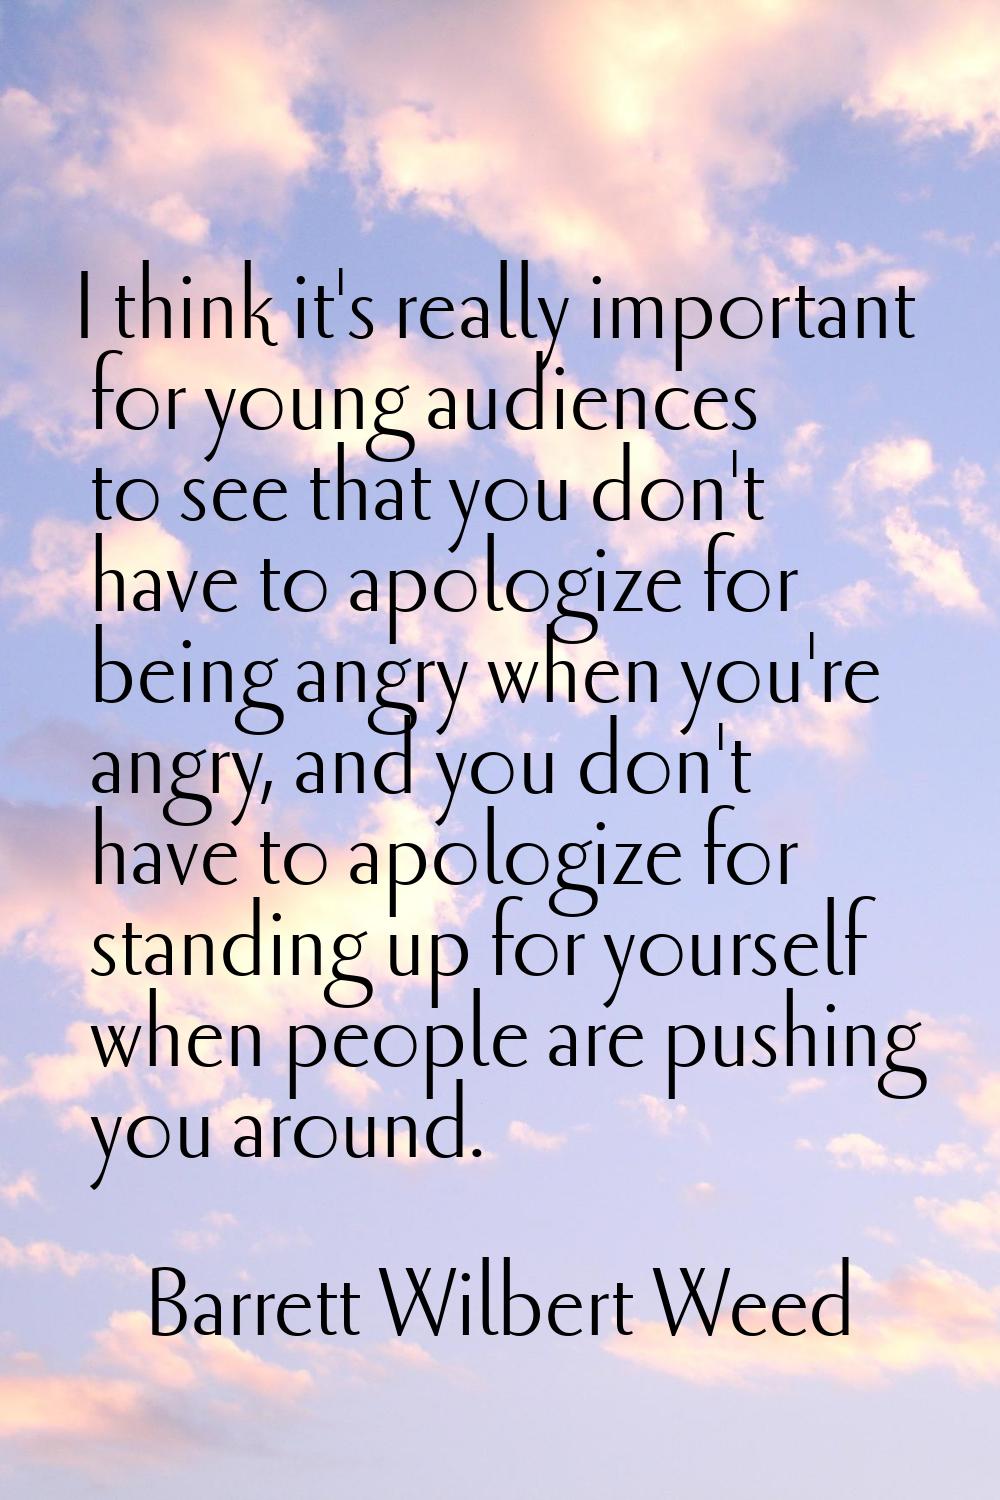 I think it's really important for young audiences to see that you don't have to apologize for being